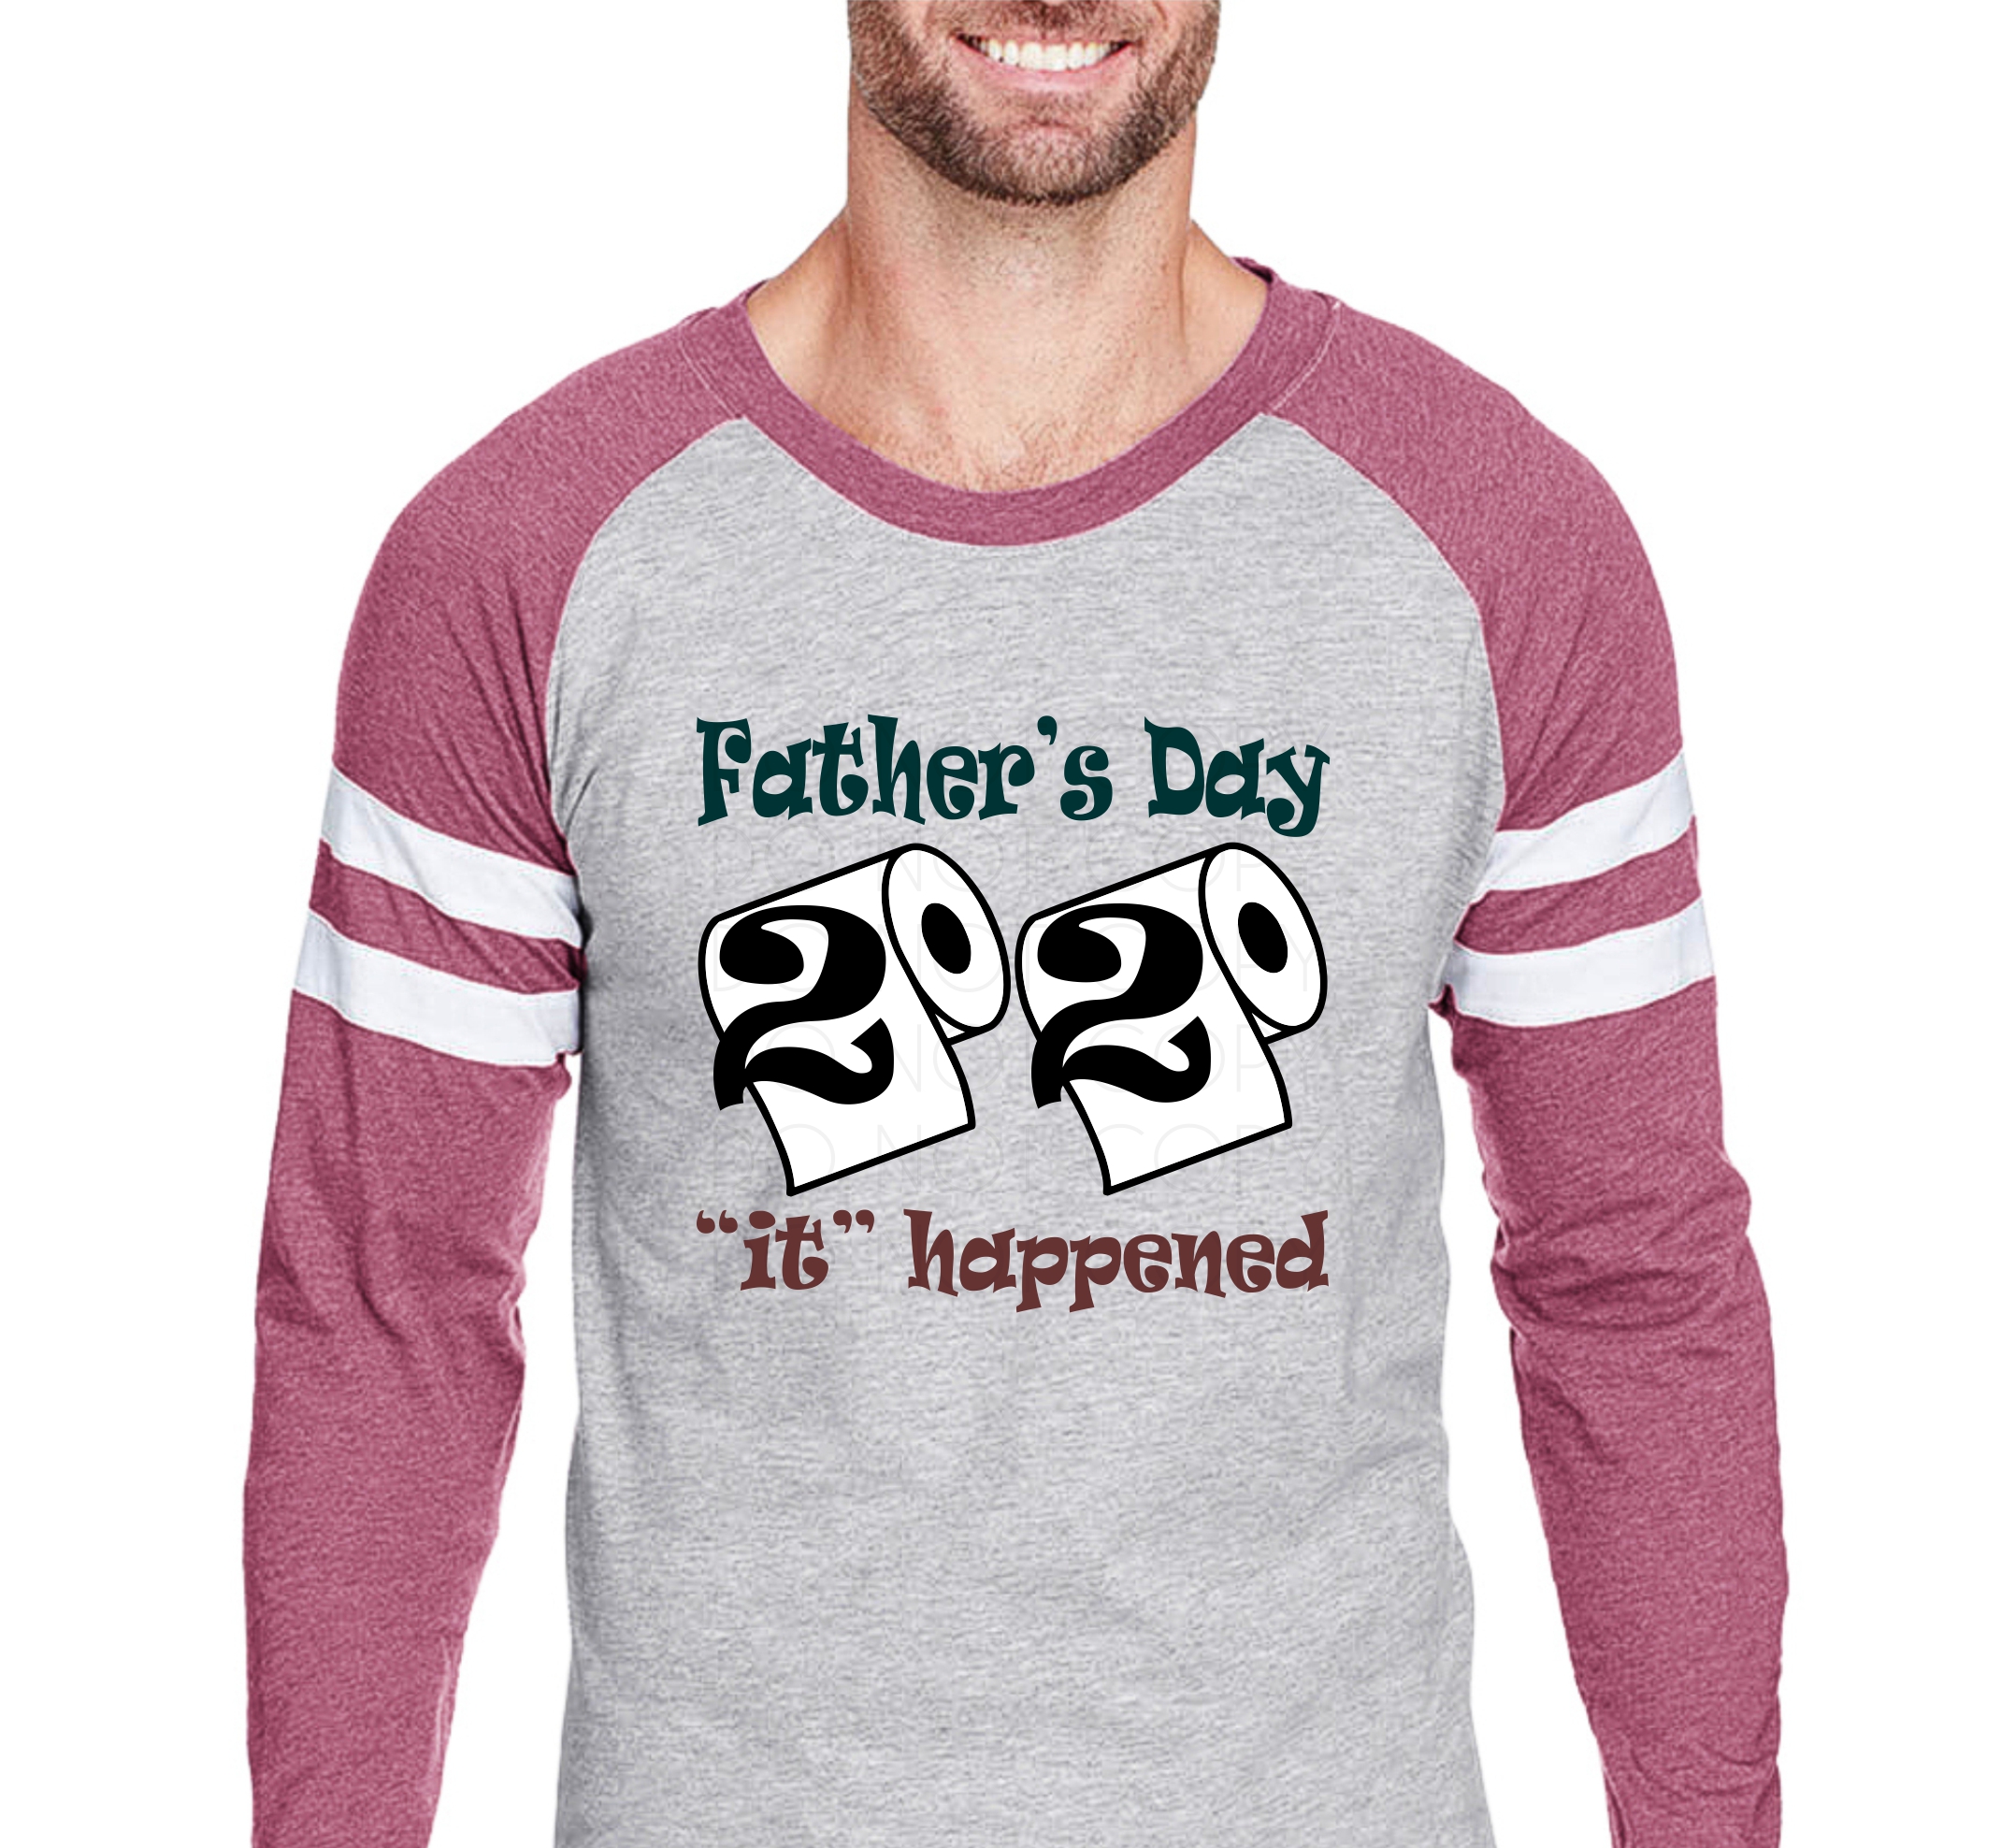 Download Father's Day 2020 It Happened SVG cut & print digital download for cutters